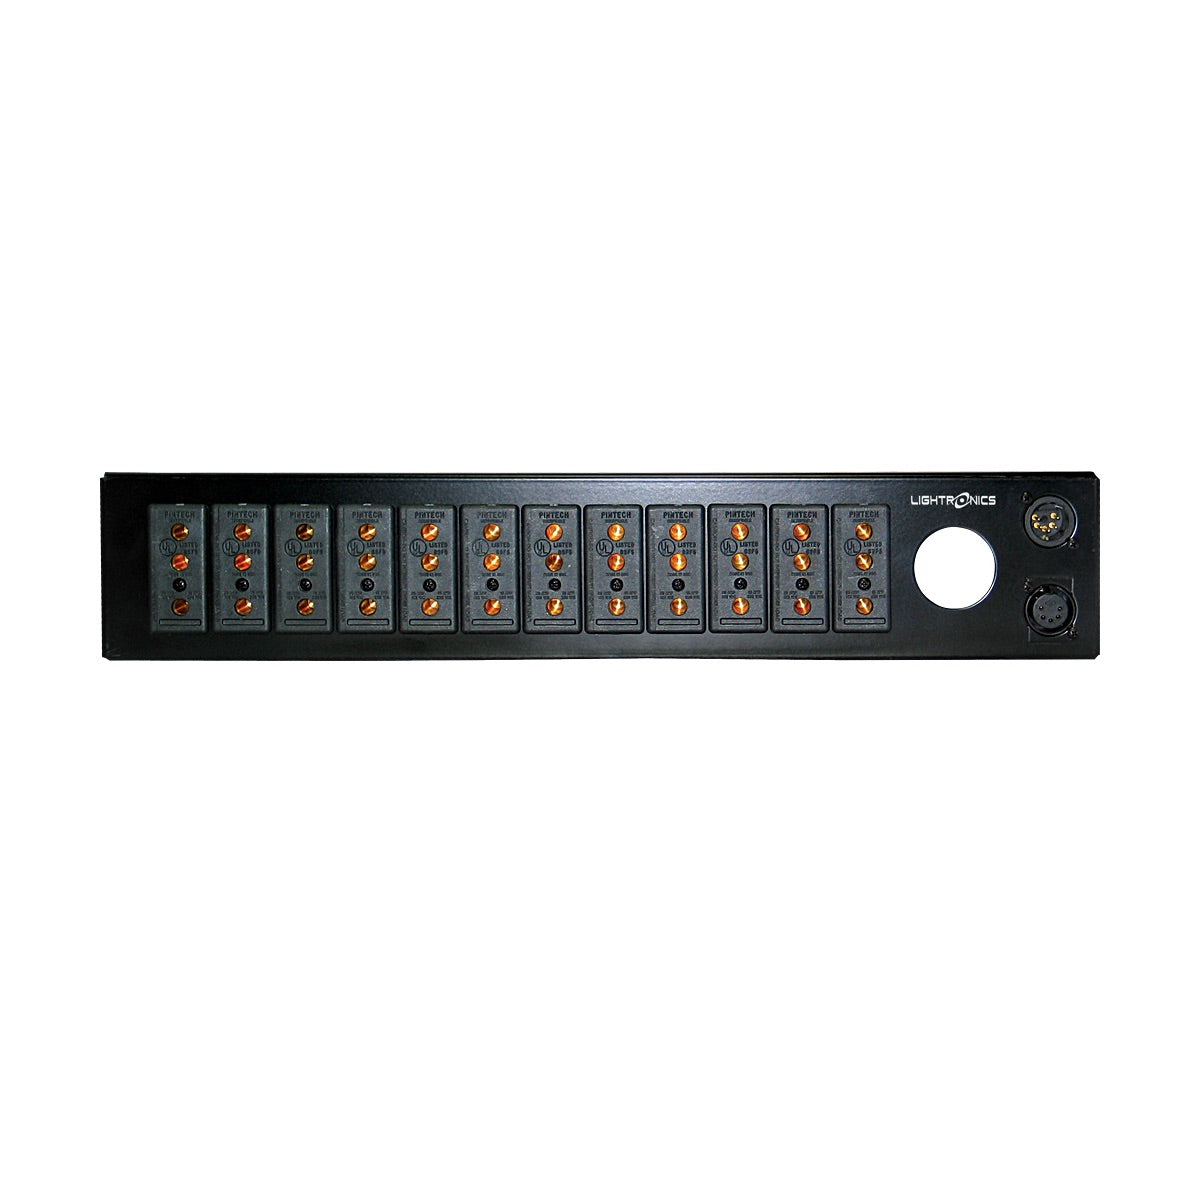 Lightronics RE82L Rack Mount Dimmer, RE Series, rear Stagepin Outlet Panel